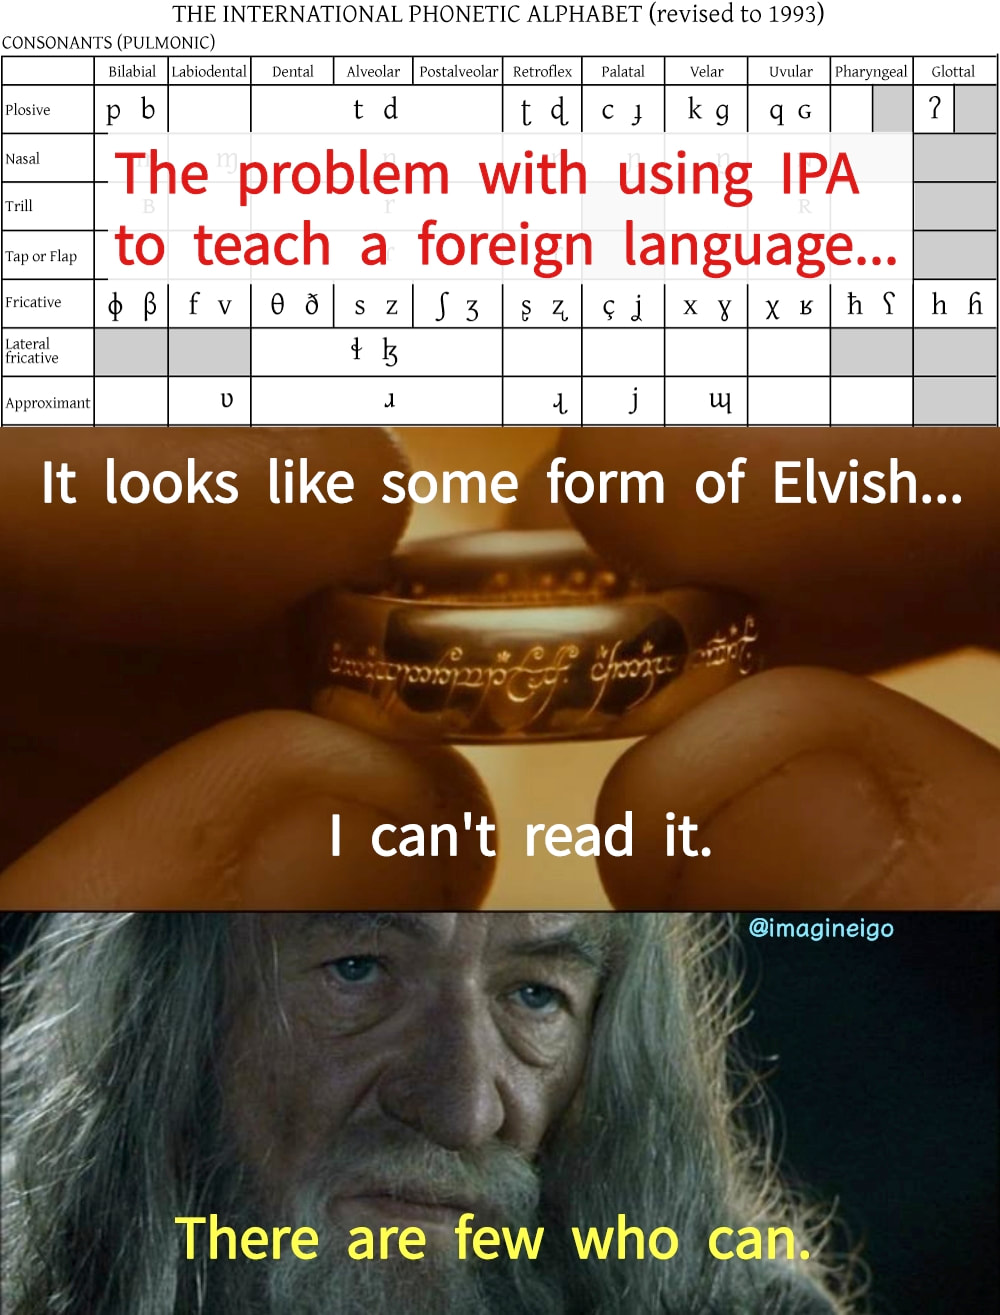 The problem with using IPA to teach a foreign language...  It looks like some form of Elvish... I can't read it.  There are few who can.